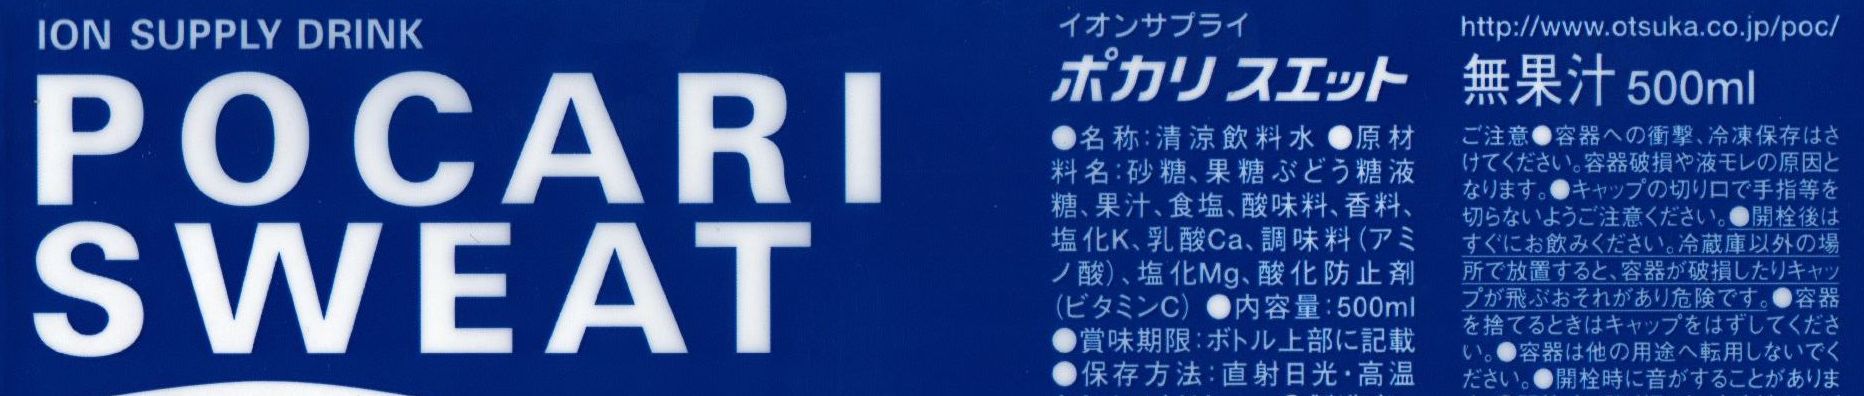 Label from a bottle of Pocari Sweat.